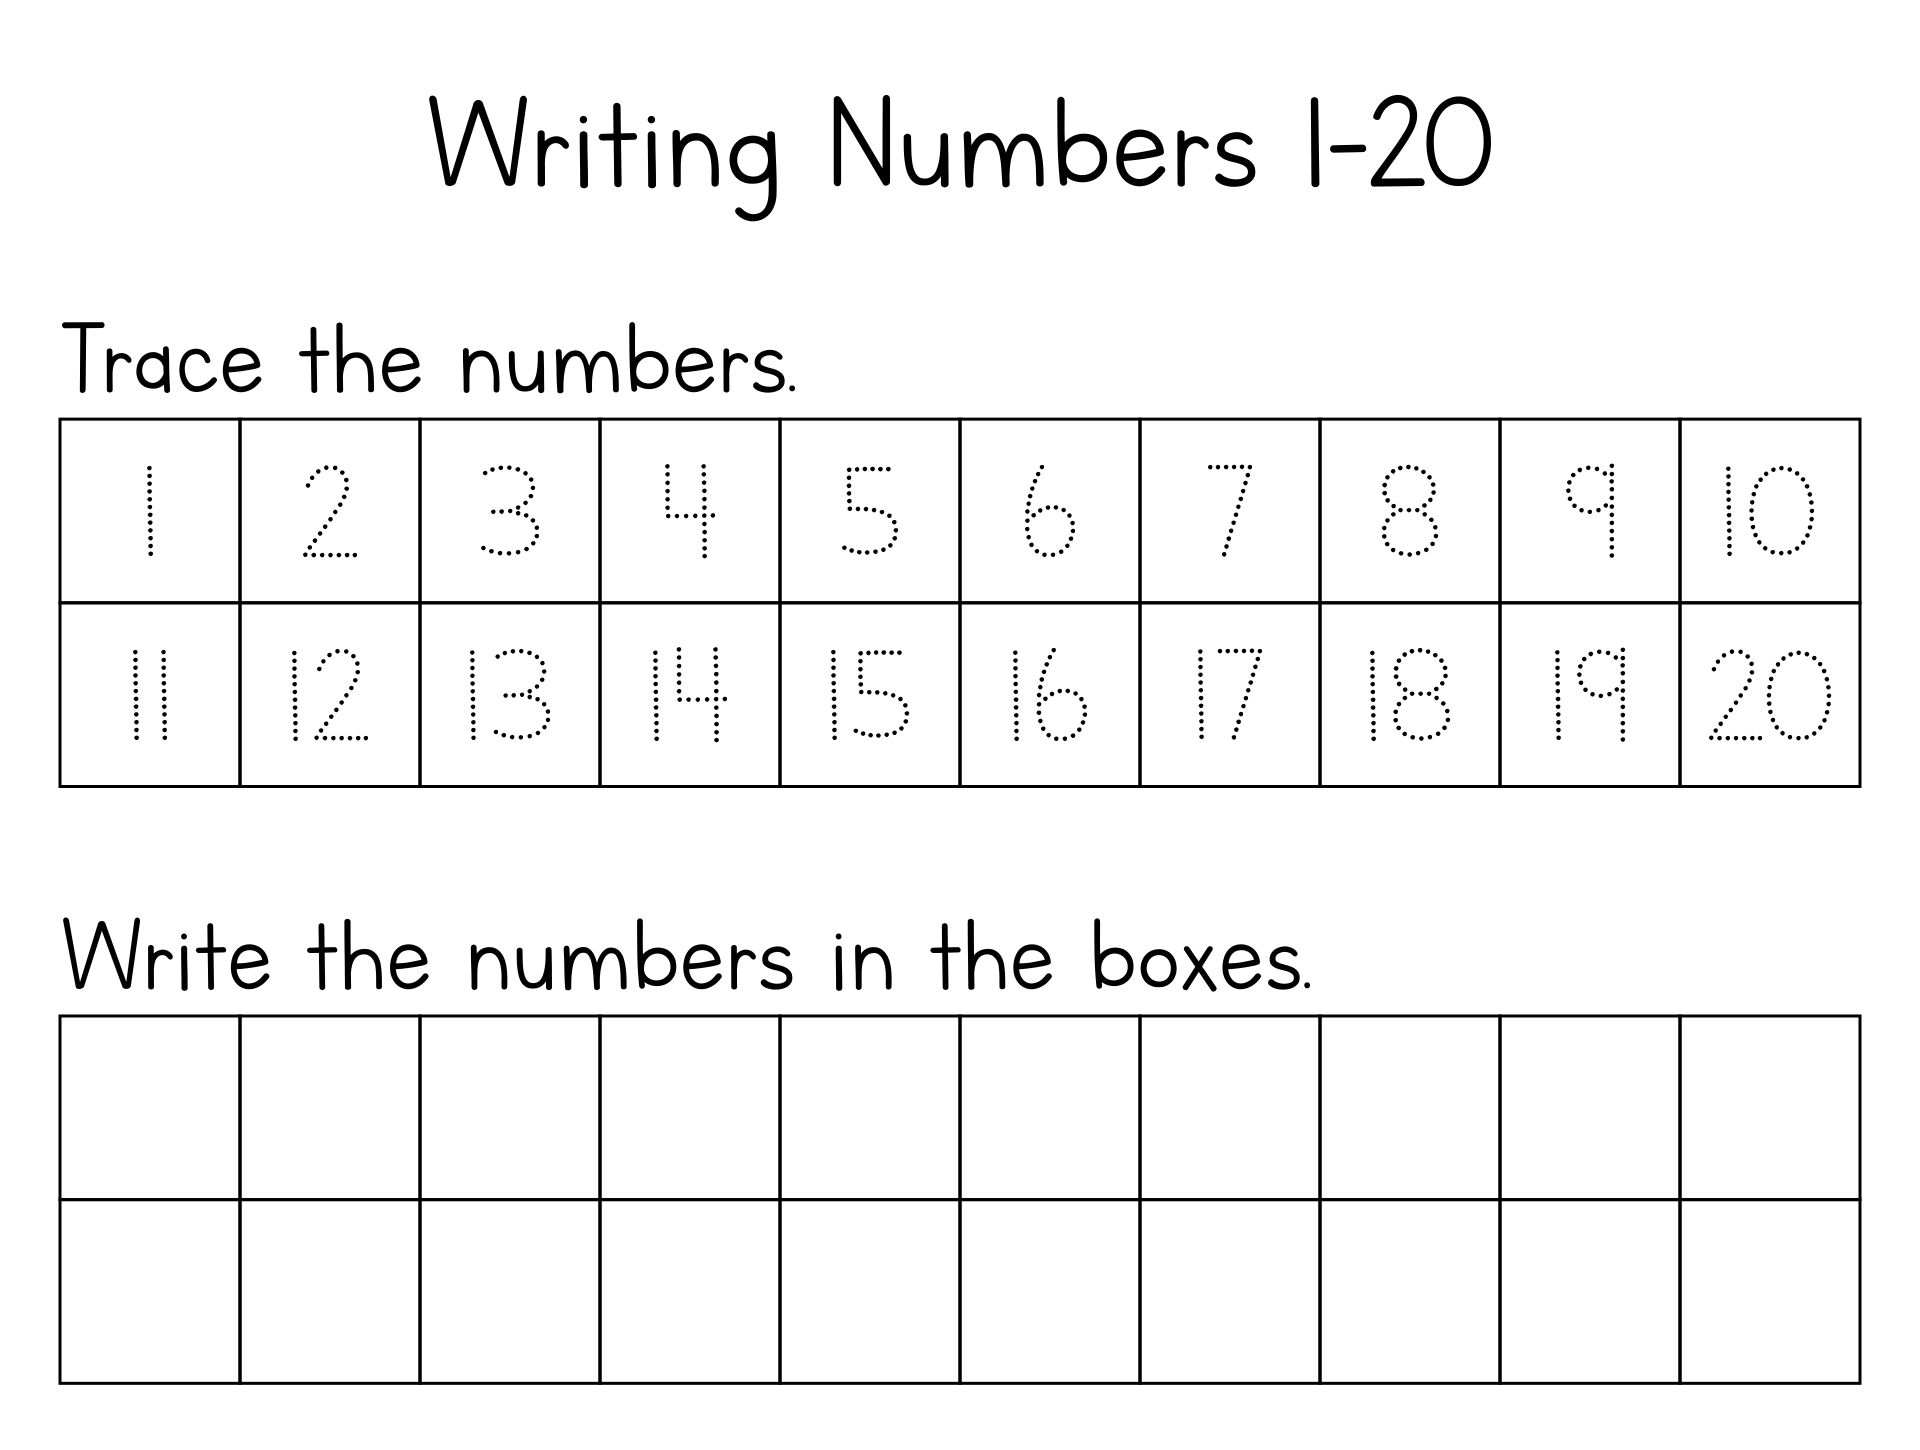 Write Numbers From 1 To 20 Printable Form Templates And Letter